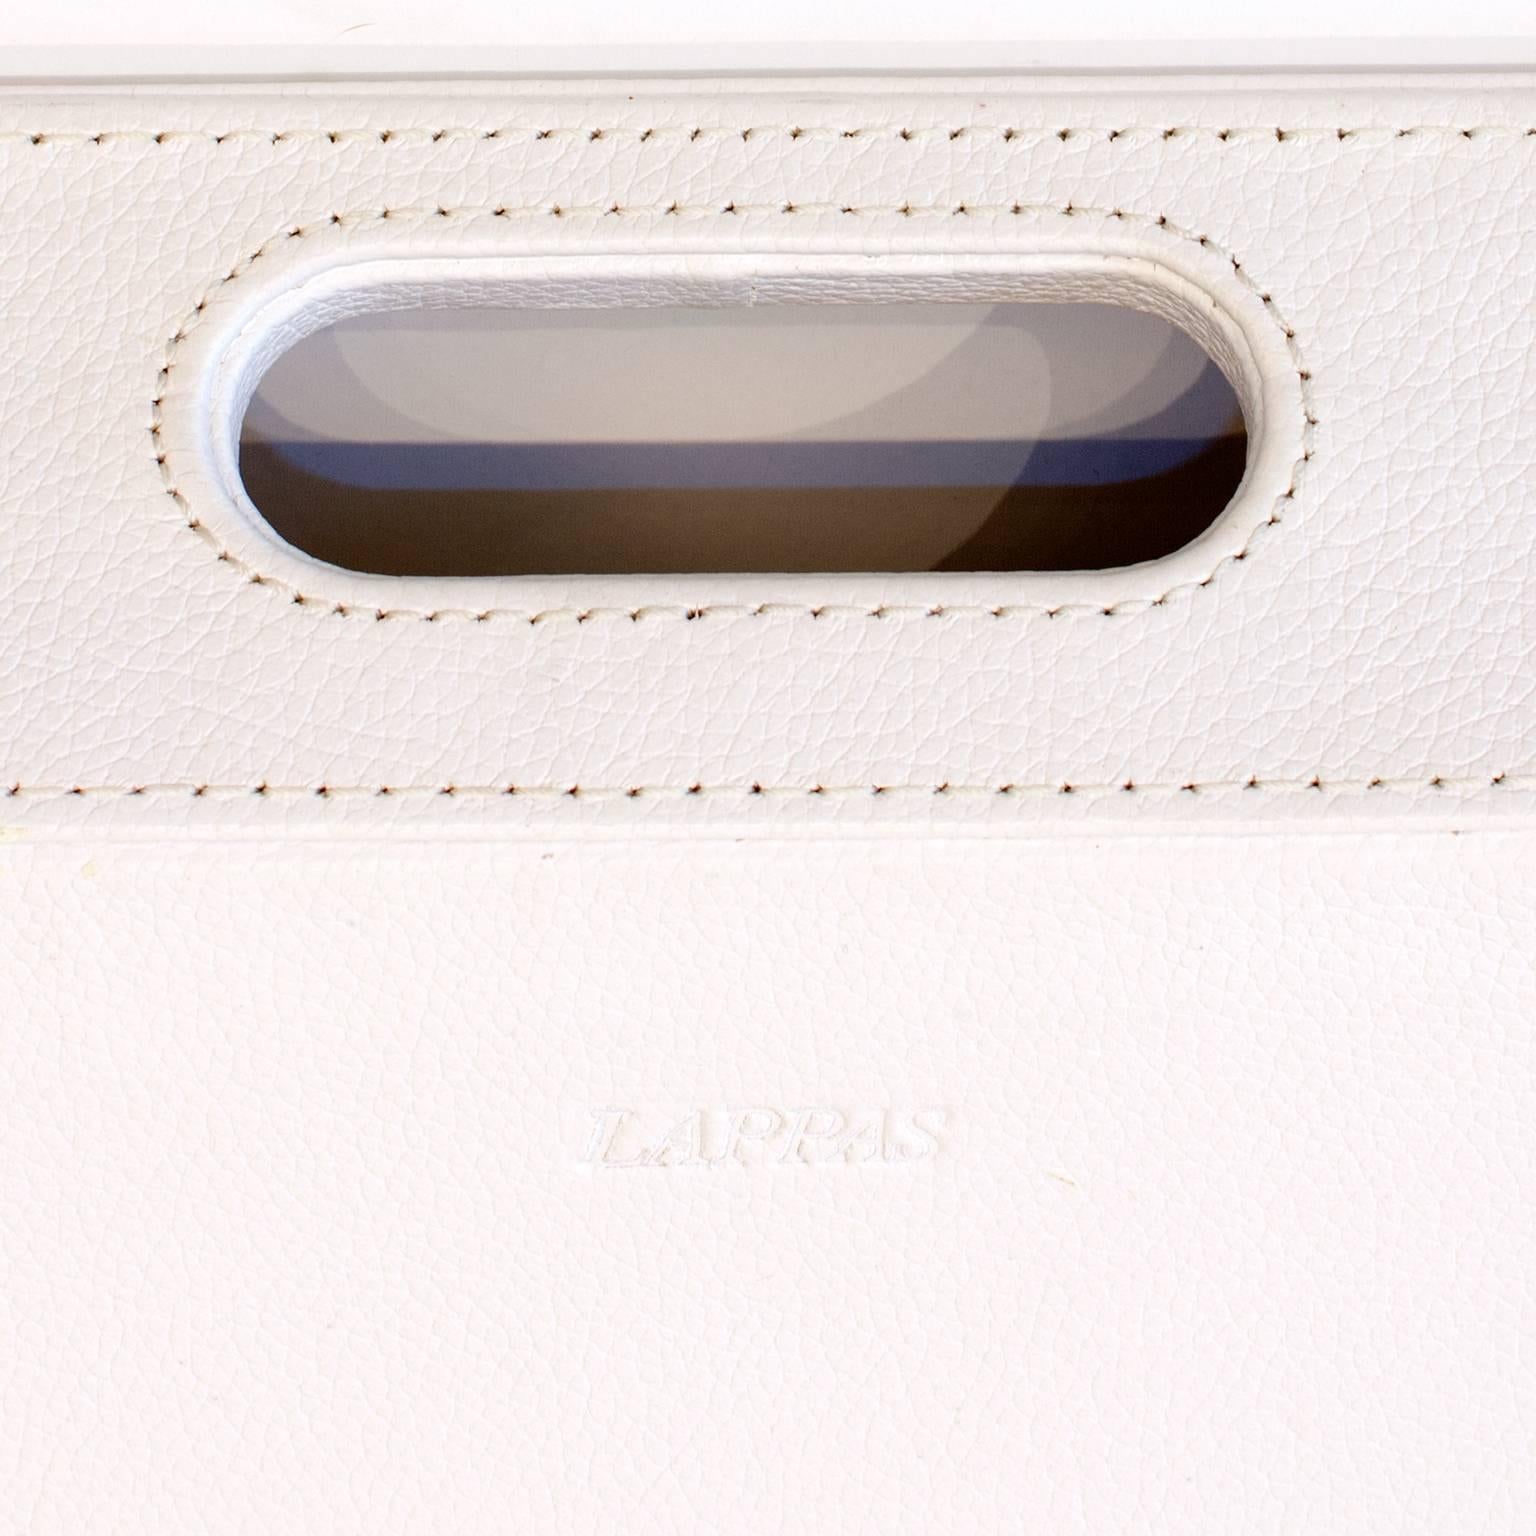 Exceptional Hand-Stitched White Leather Tray For Sale 2